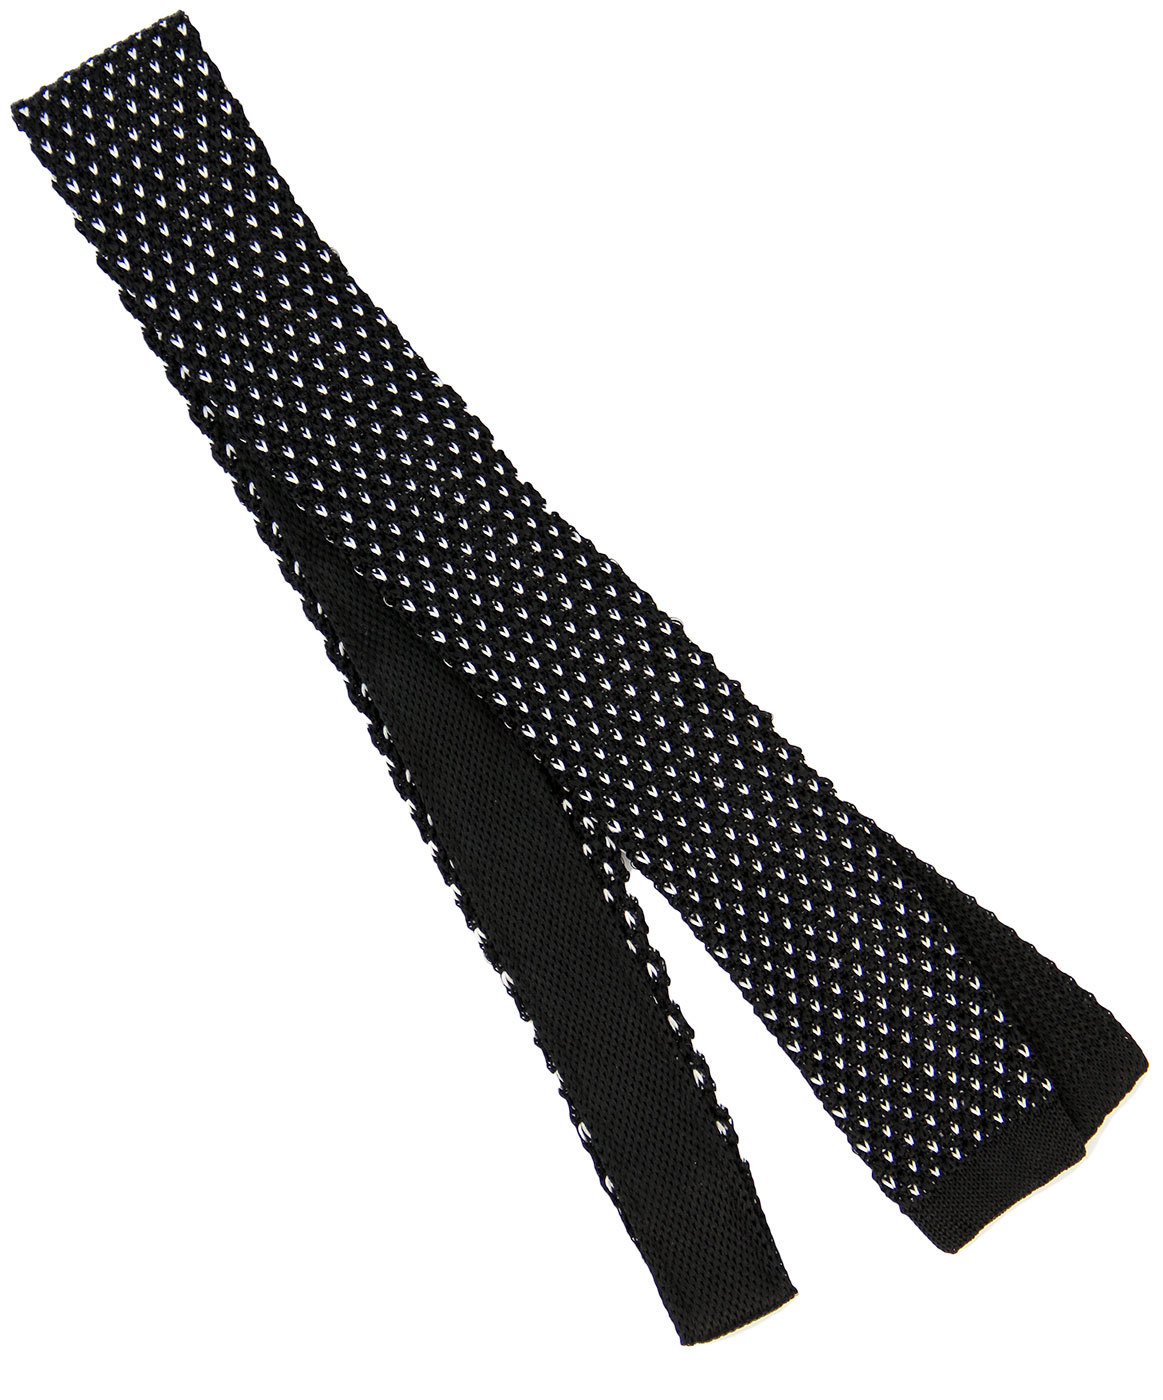 TOOTAL Retro 1960s Mod Silk Knitted Micro Dot Tie in Black